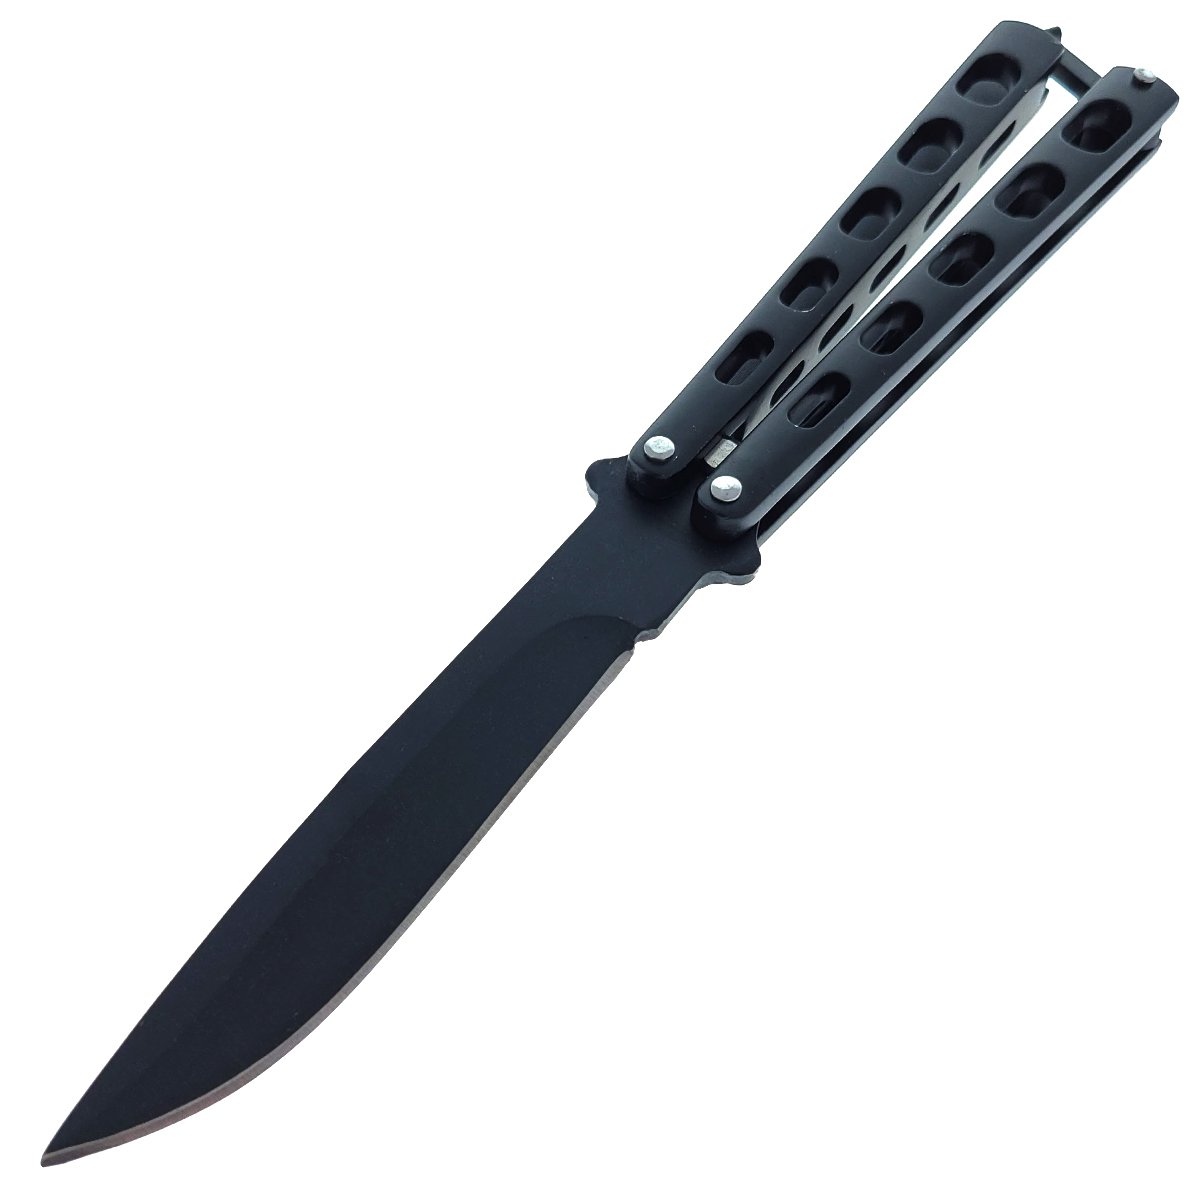 Heavy State of The Art Folding Balisong Butterfly Knife Black